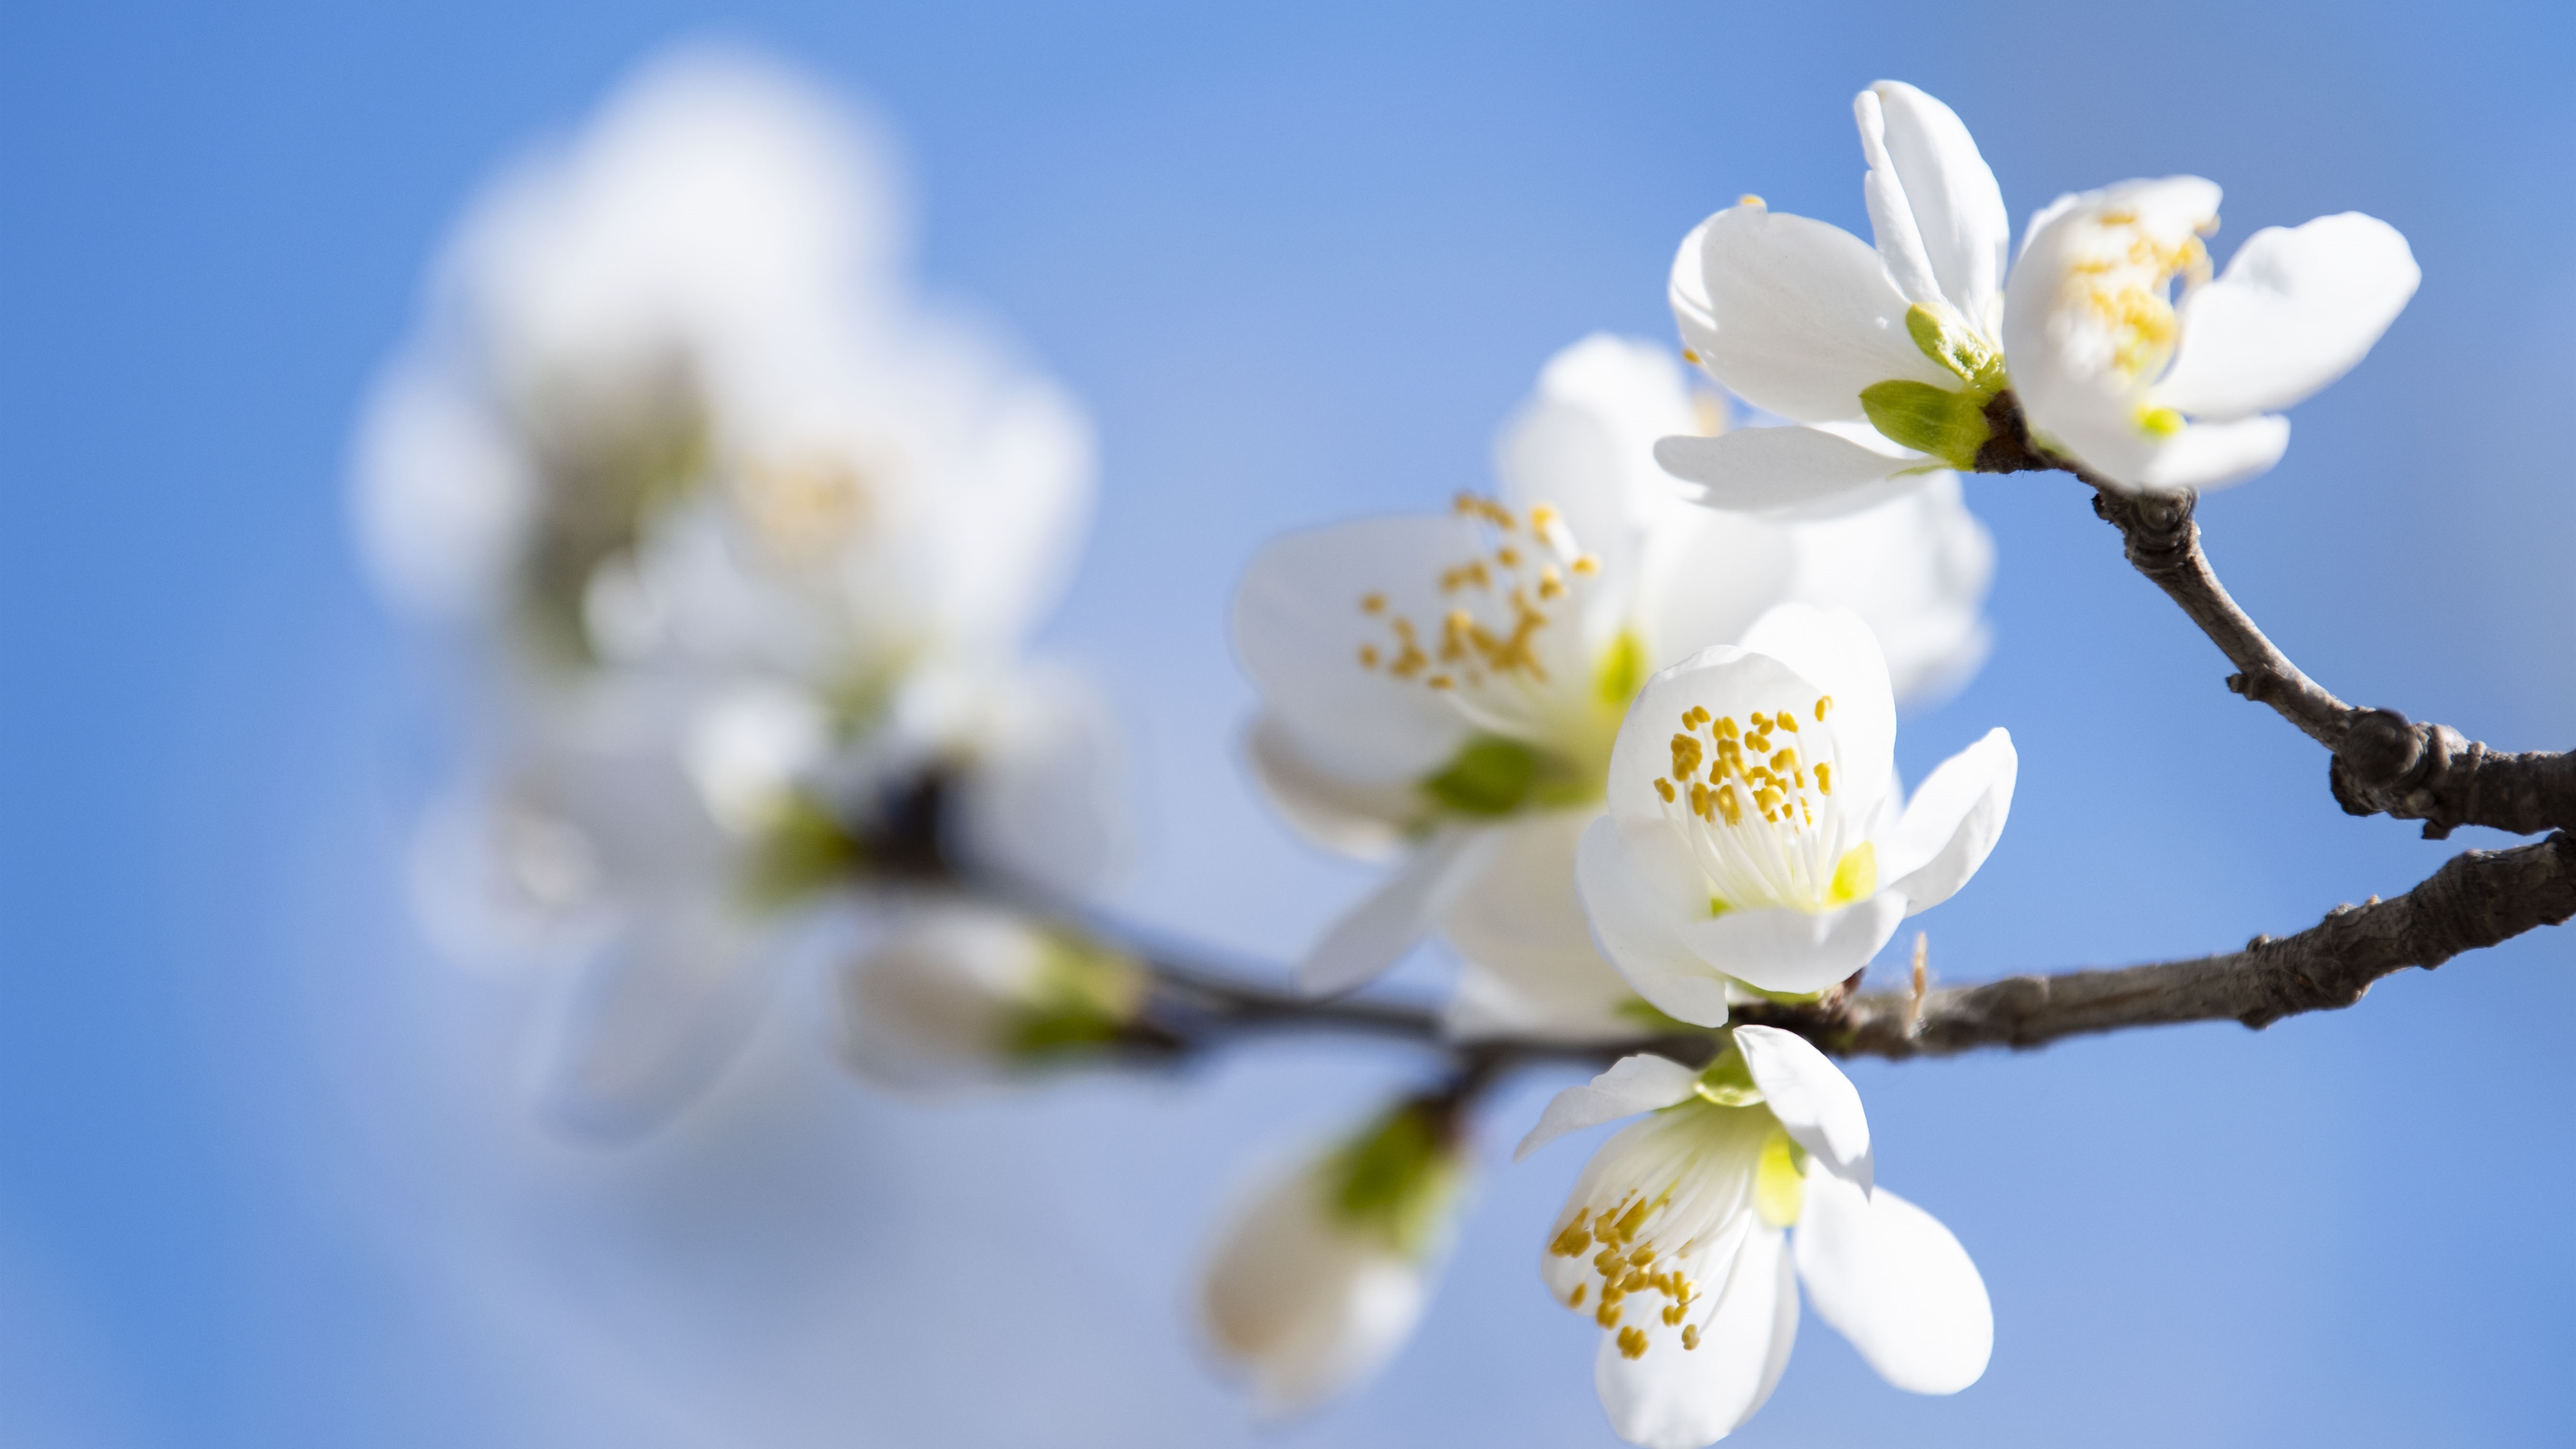 Wallpapers spring flowers plums branch on the desktop